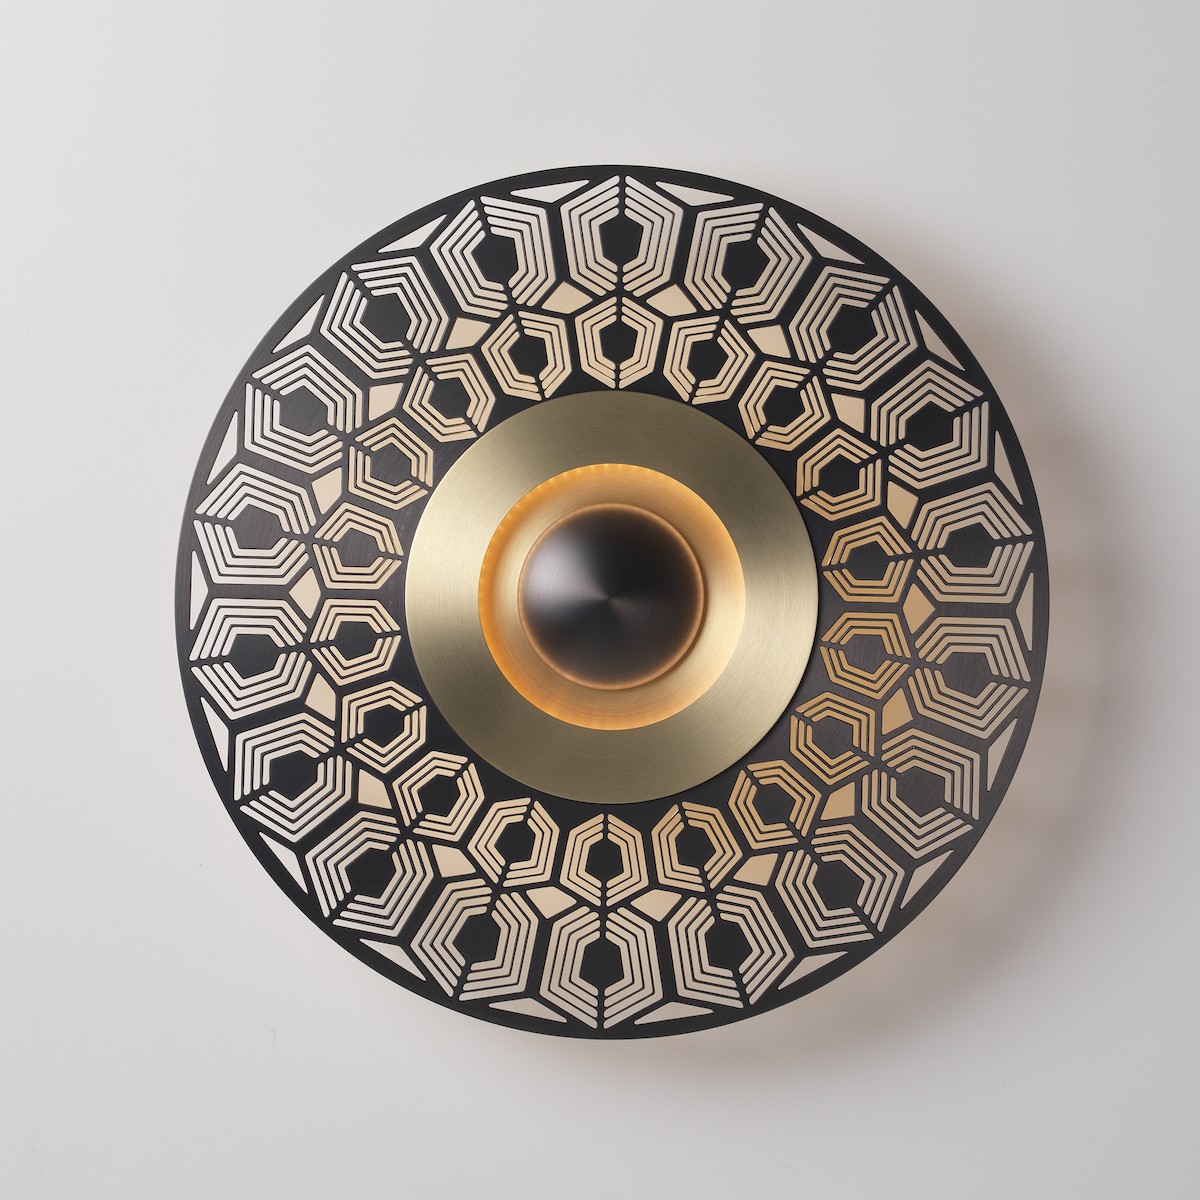 Ø33cm - graphite / brass satin - Earth Turtle - wall / ceiling lamp